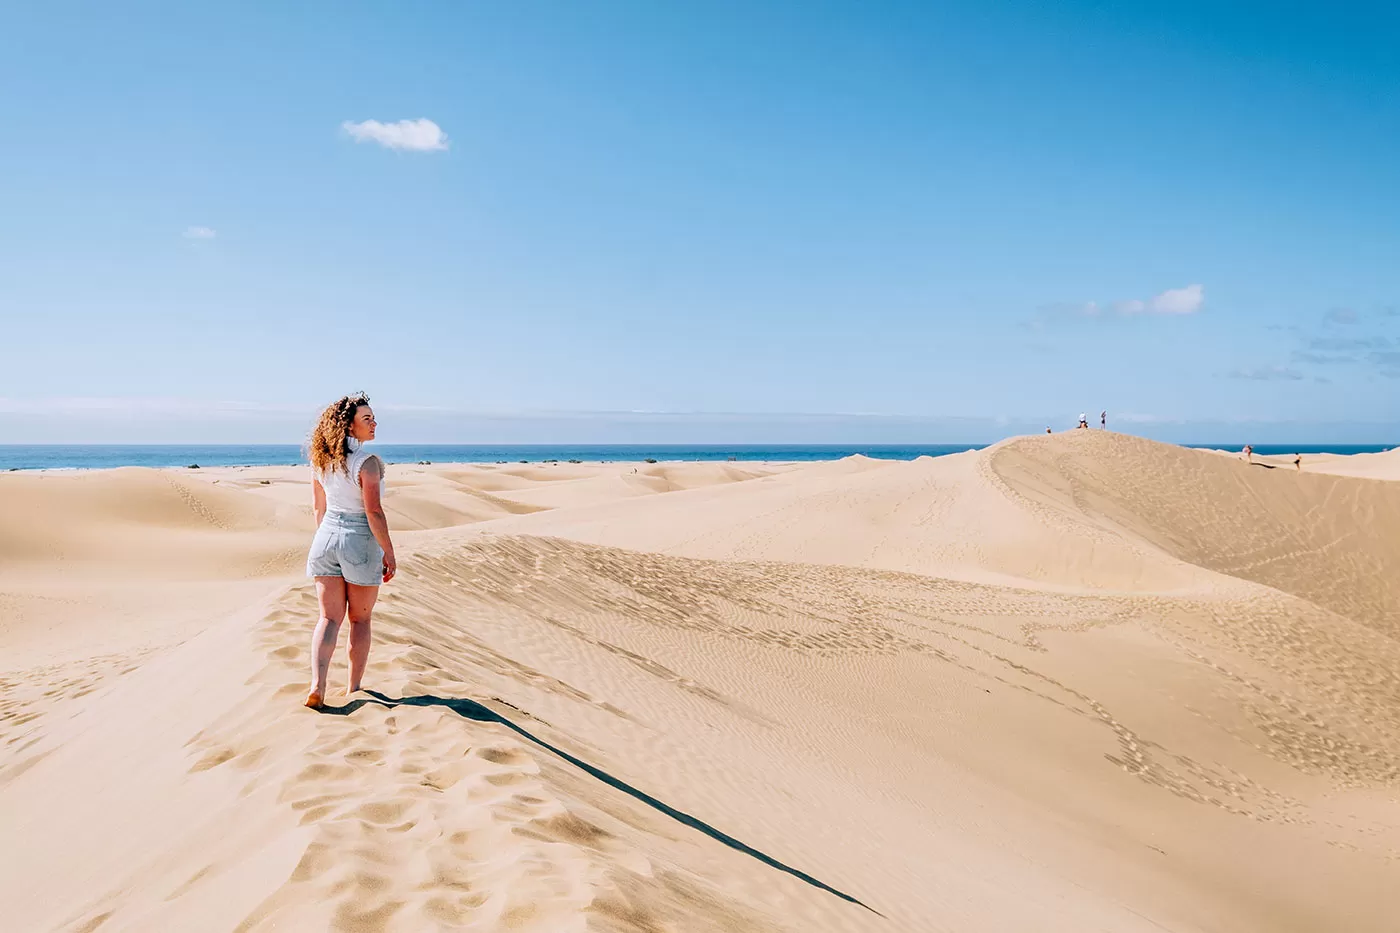 Things to do in Gran Canaria Spain - Explore the Maspalomas Dunes